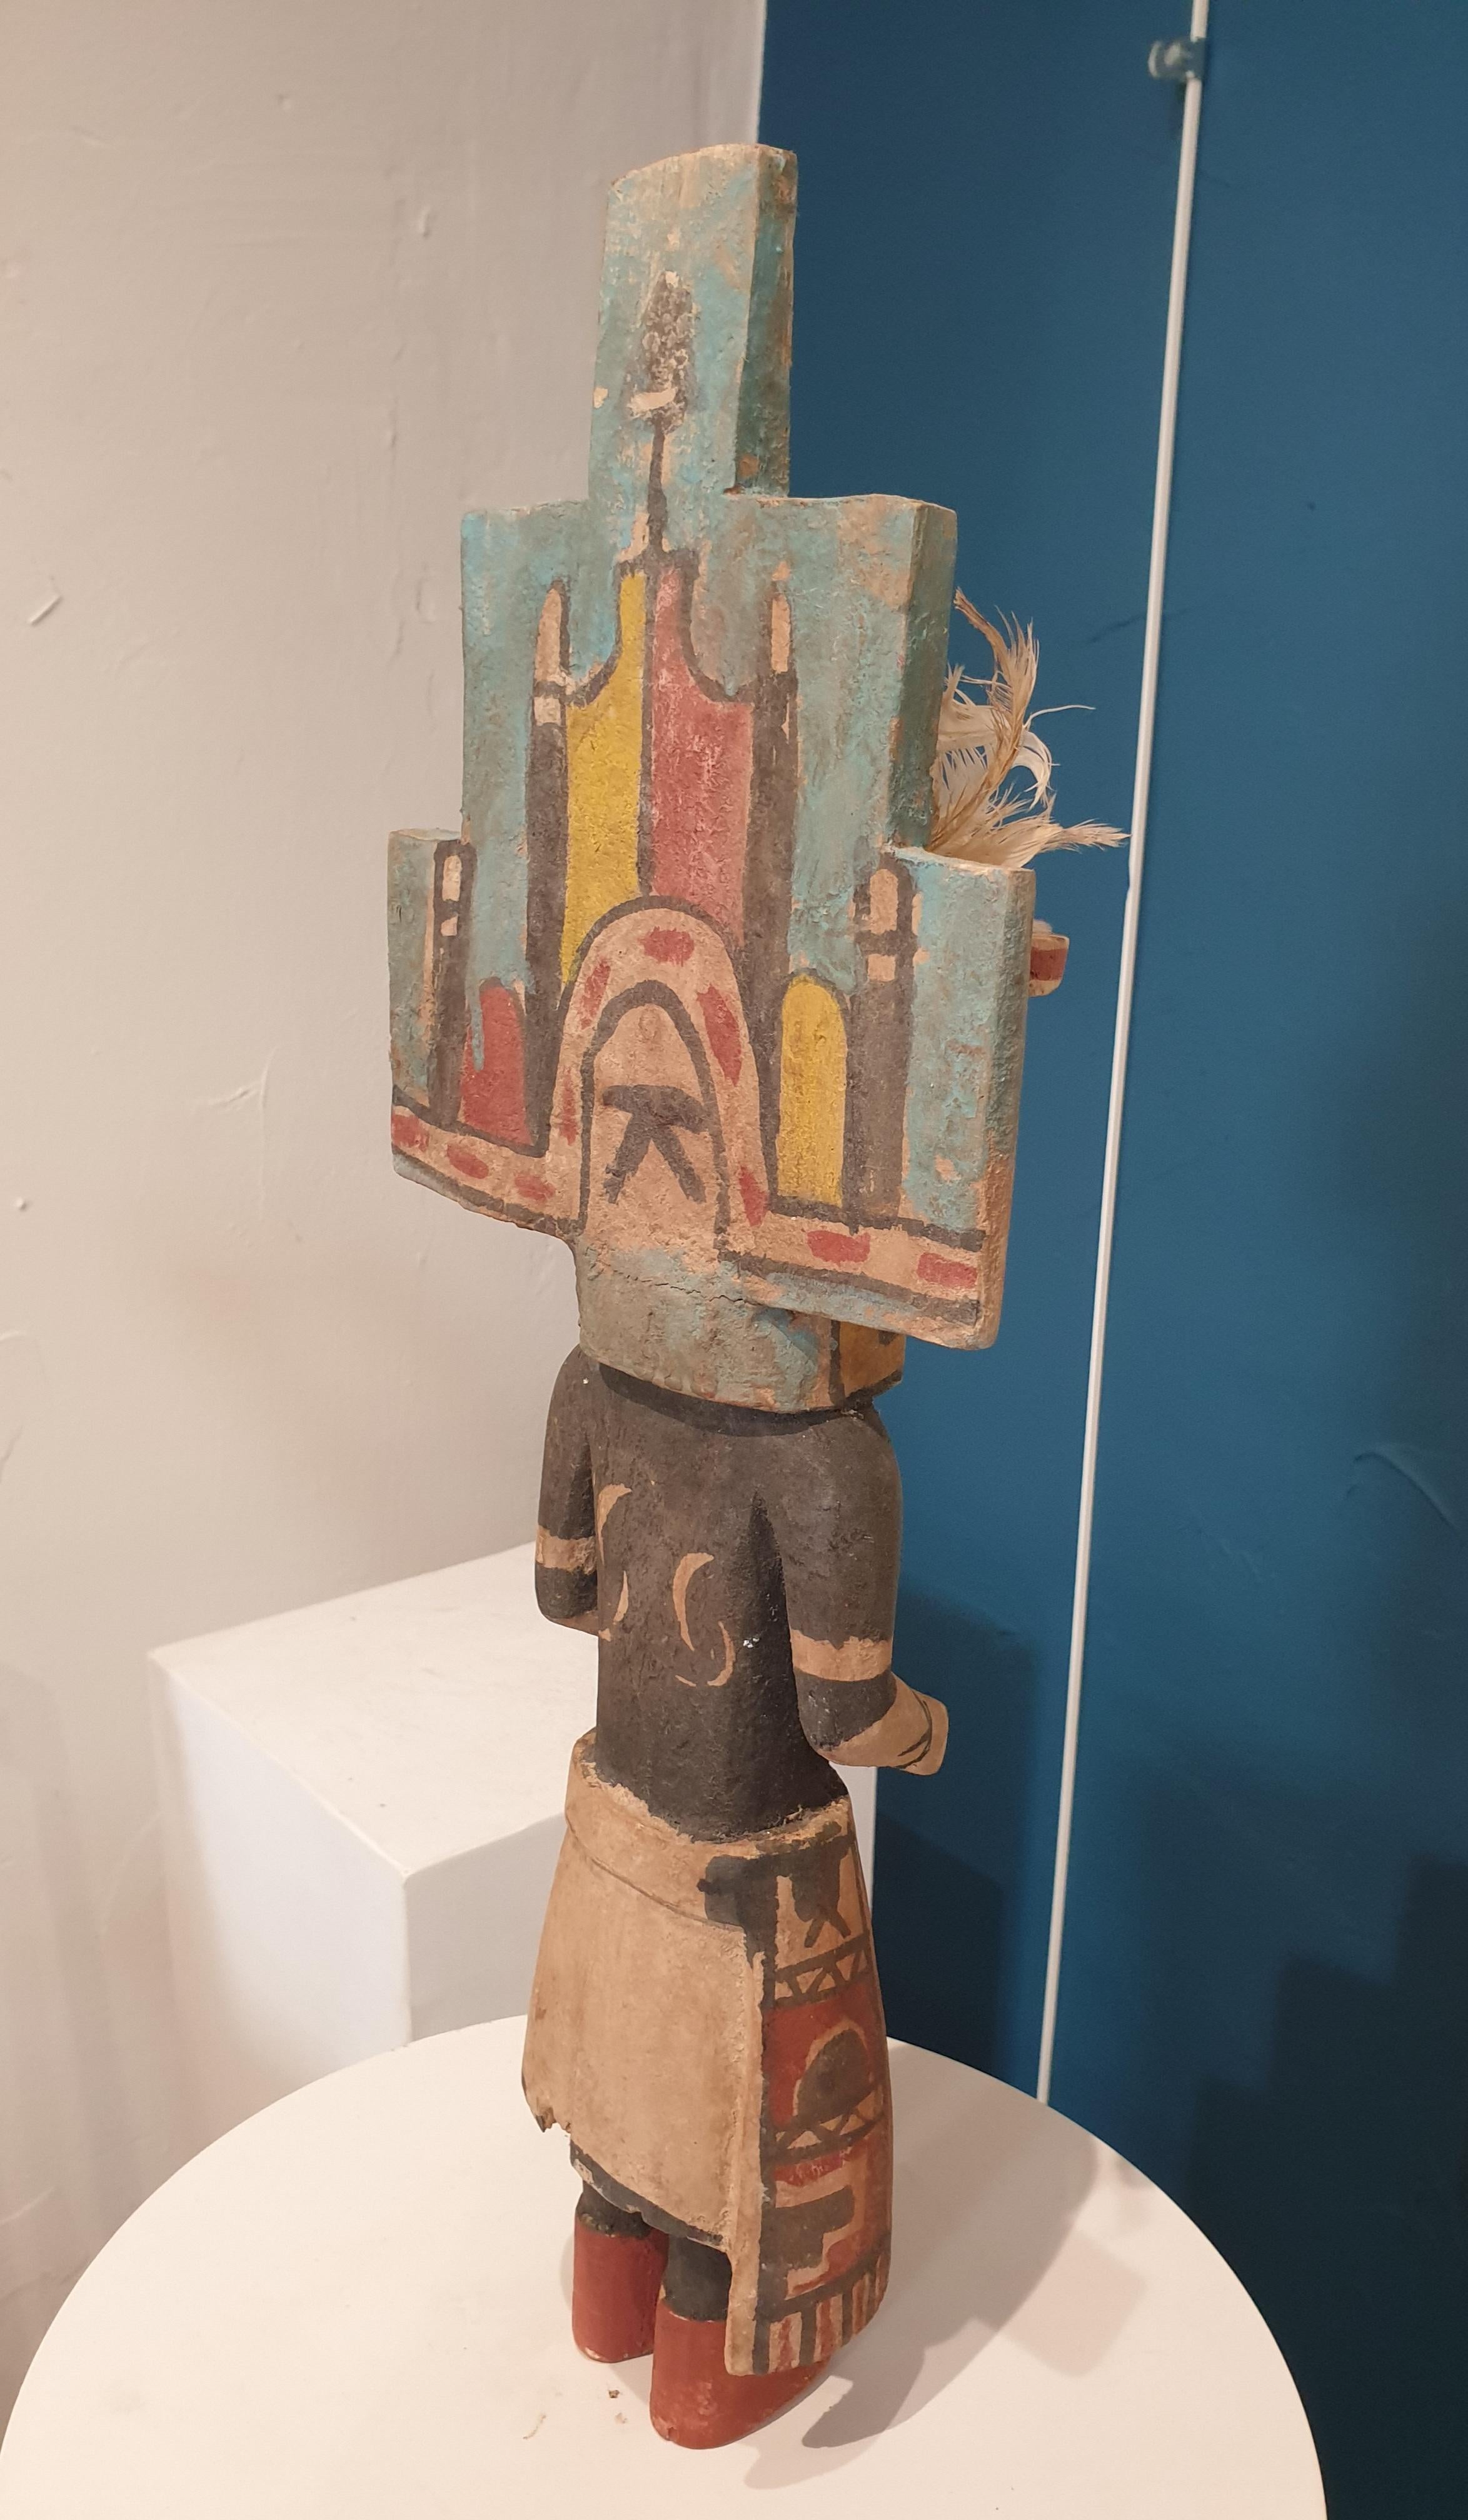 Native North American carved wood and painted effigy figure, Hopi Katsina or Kachina doll. This is one of a group of eight dolls all individually priced, or available as a set, and on 1stdibs. 

Hopi Katsina dolls are wooden effigies of the Katsinam